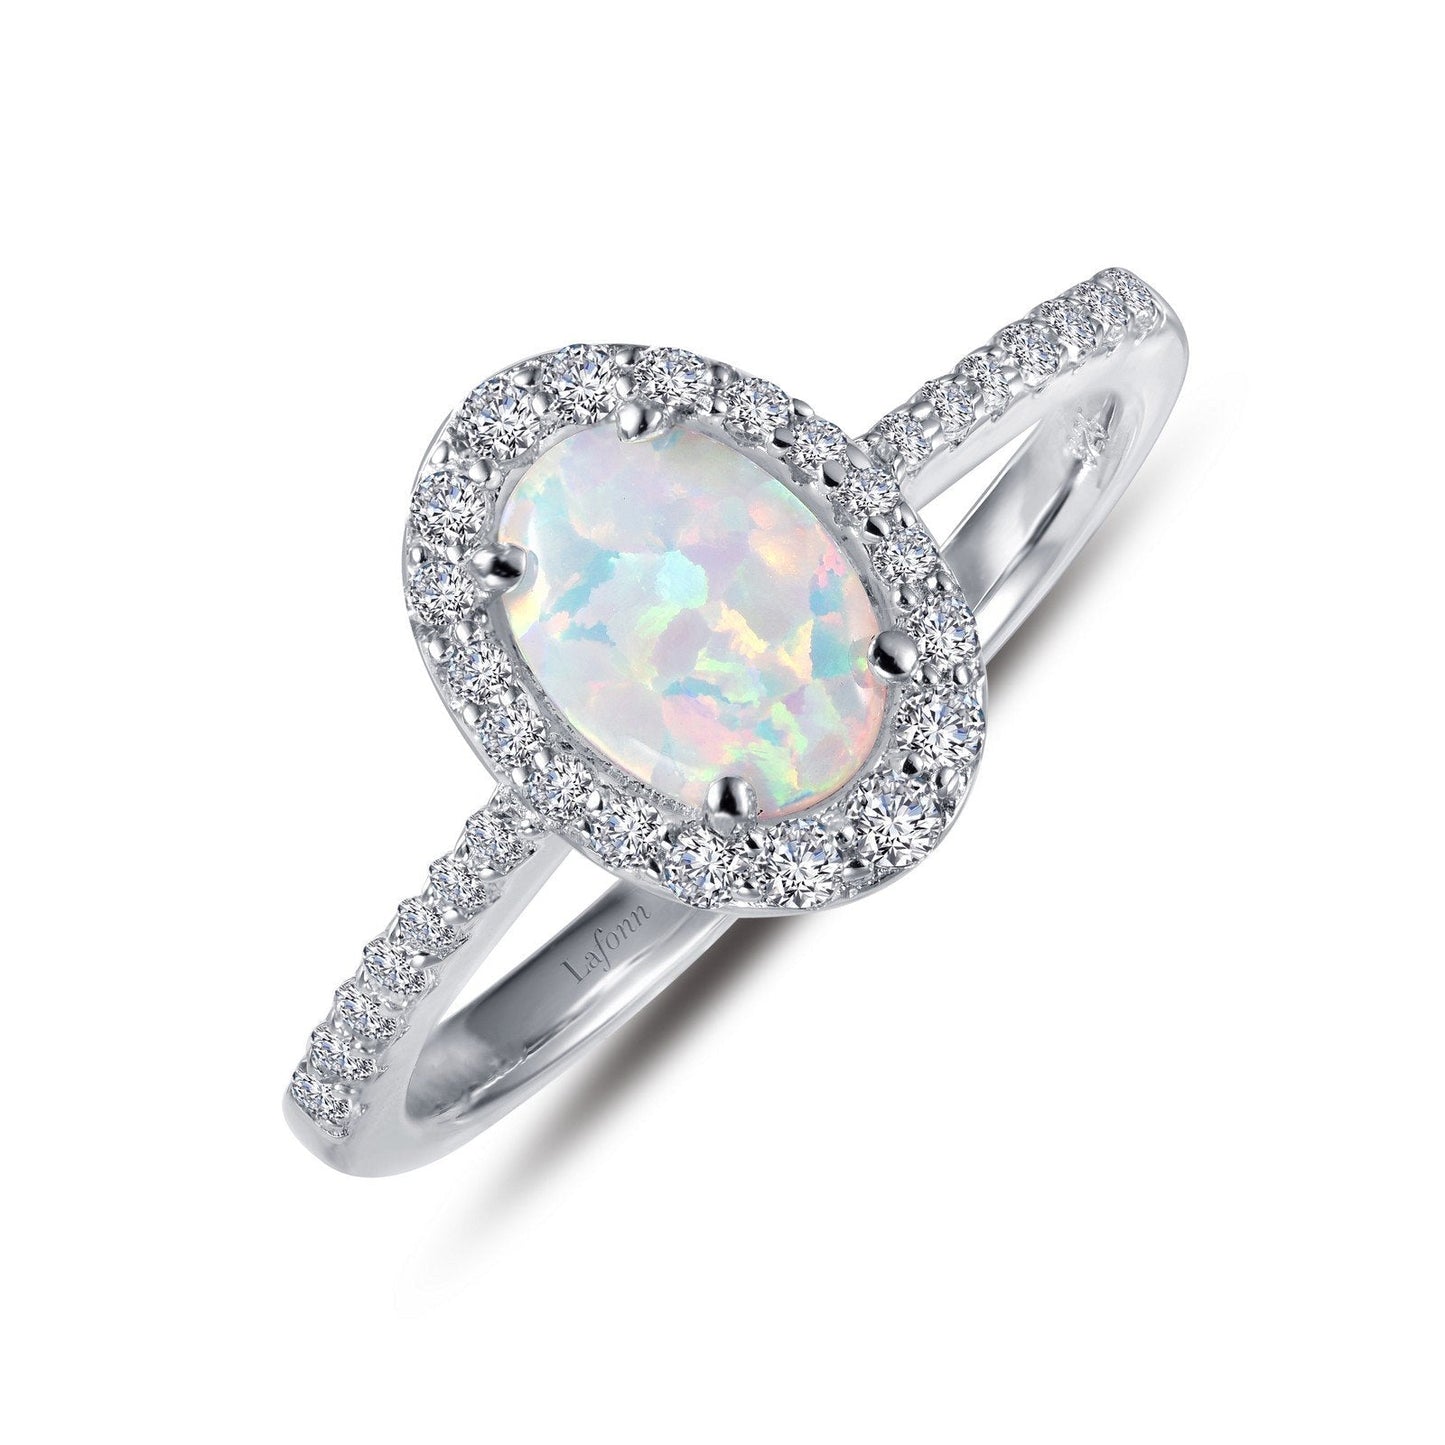 LaFonn Platinum Opal  7X5mm Oval, Opal N/A CTW RINGS Halo Engagement Ring